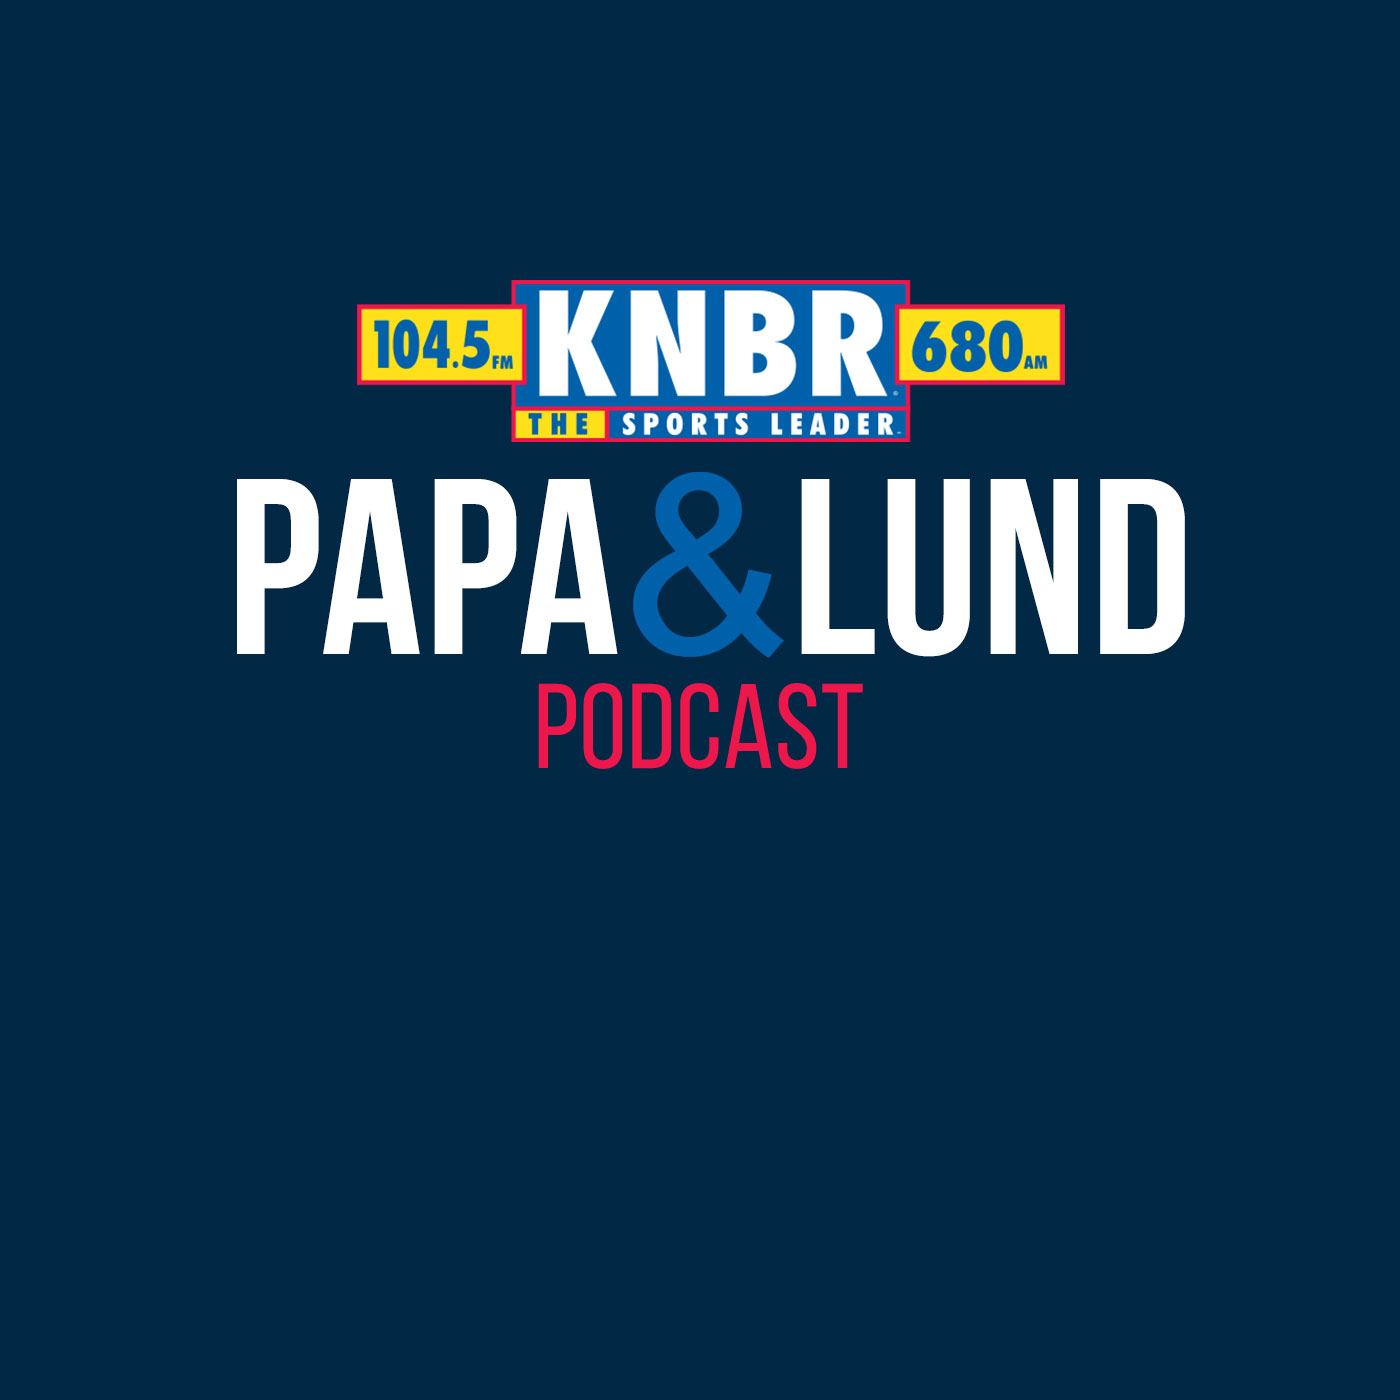 1-11 Papa & Lund preview this weekends huge 49ers / Cowboys game with Norm Hitzges of KTCK in Dallas